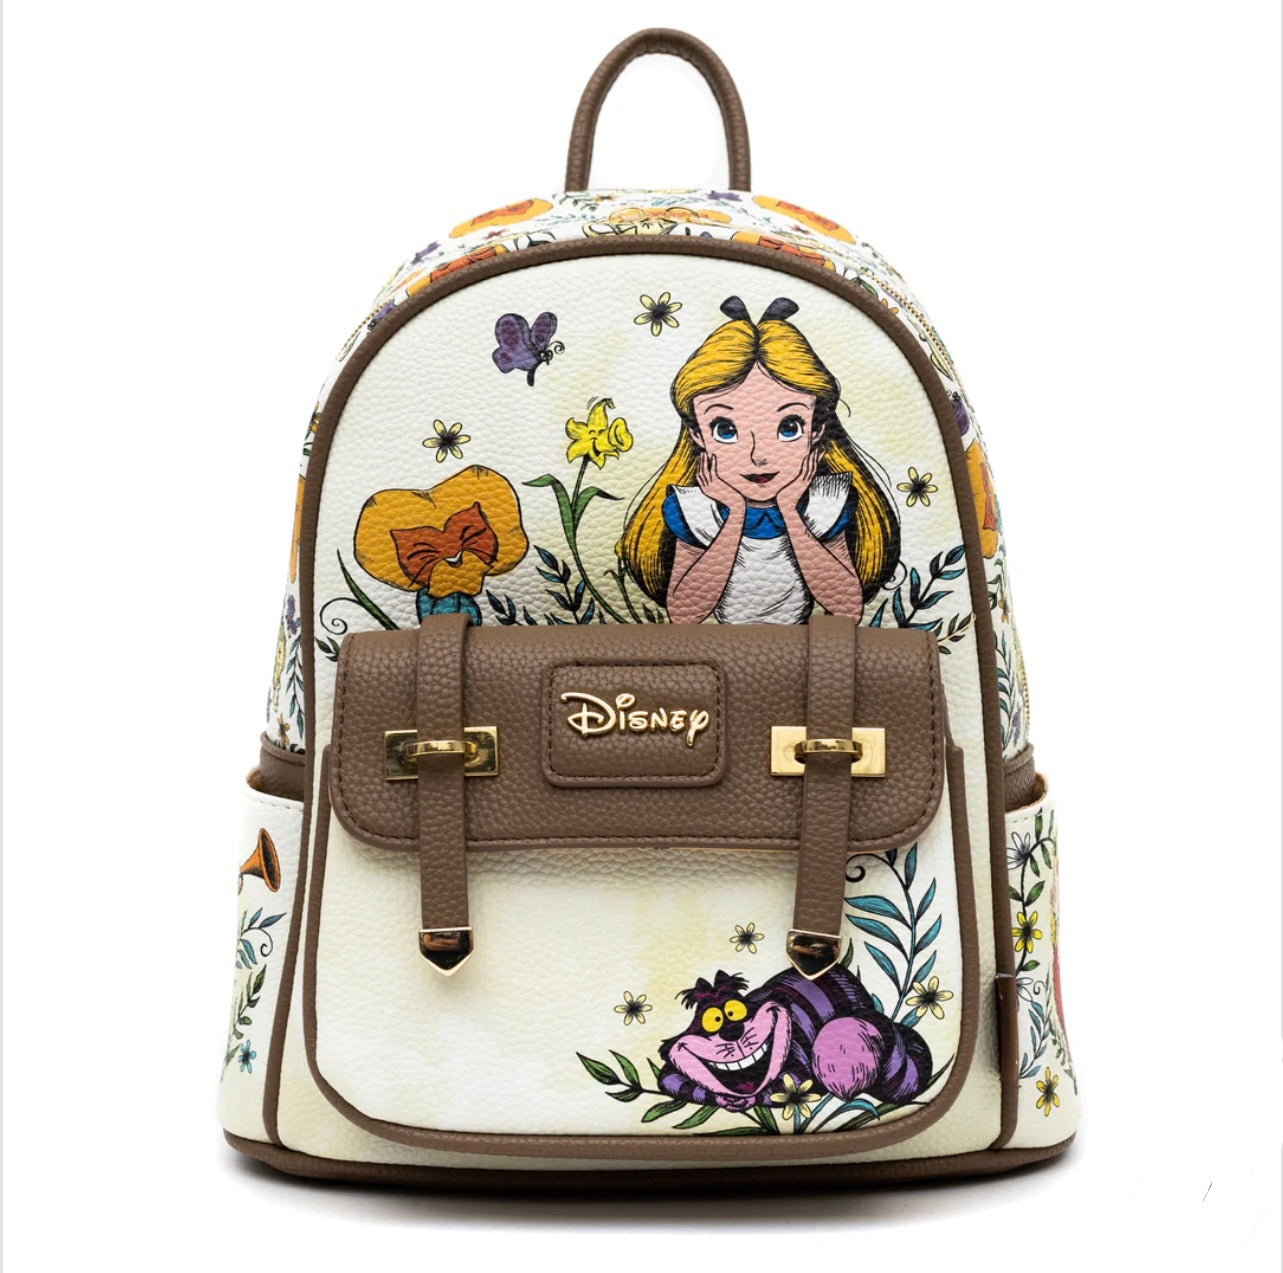 Exclusive Limited Edition -Alice in Wonderland Vegan Leather Backpack